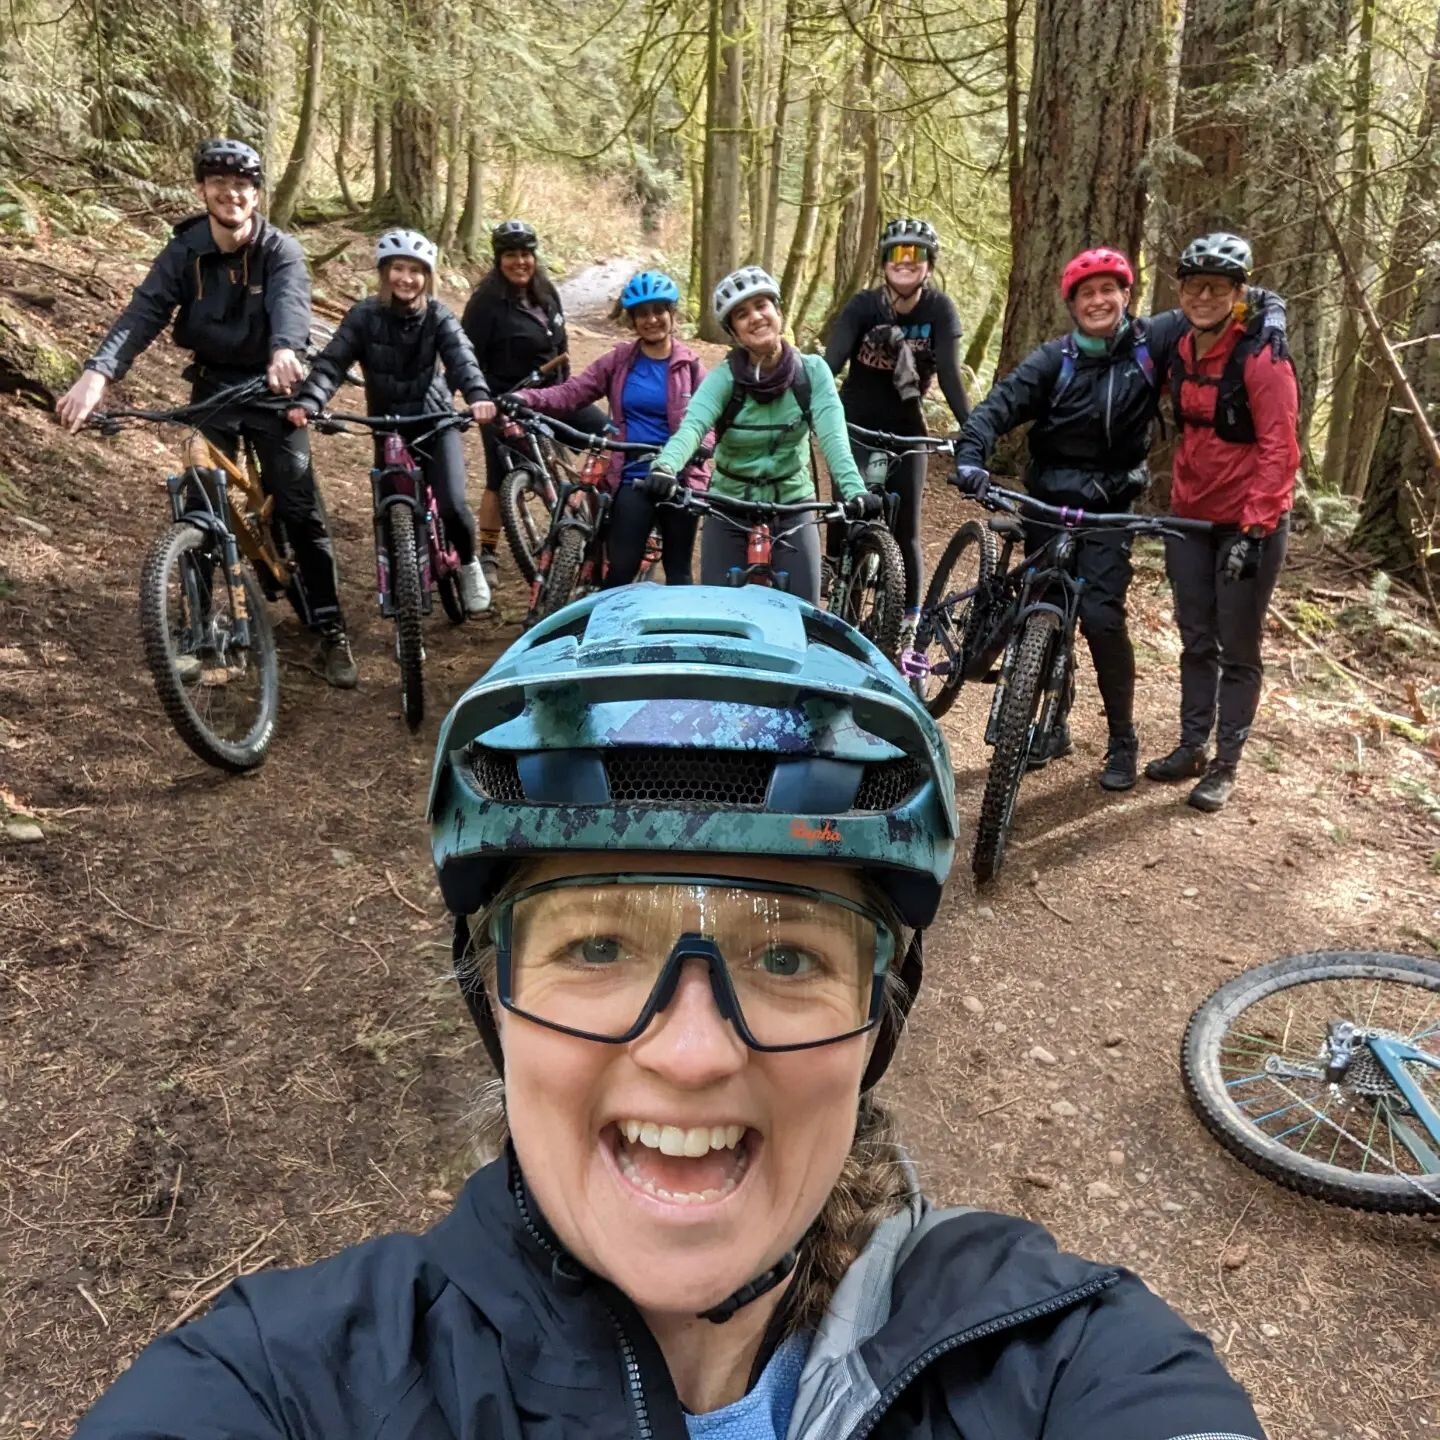 Well that was fun! 

Thanks to everyone who came out for the @transitionbikes &amp; @letsshiftgears #internationalwomensday group ride yesterday. We had seasoned pros, never-biked-off-road-before newbies, and everything in-between join us for our cel